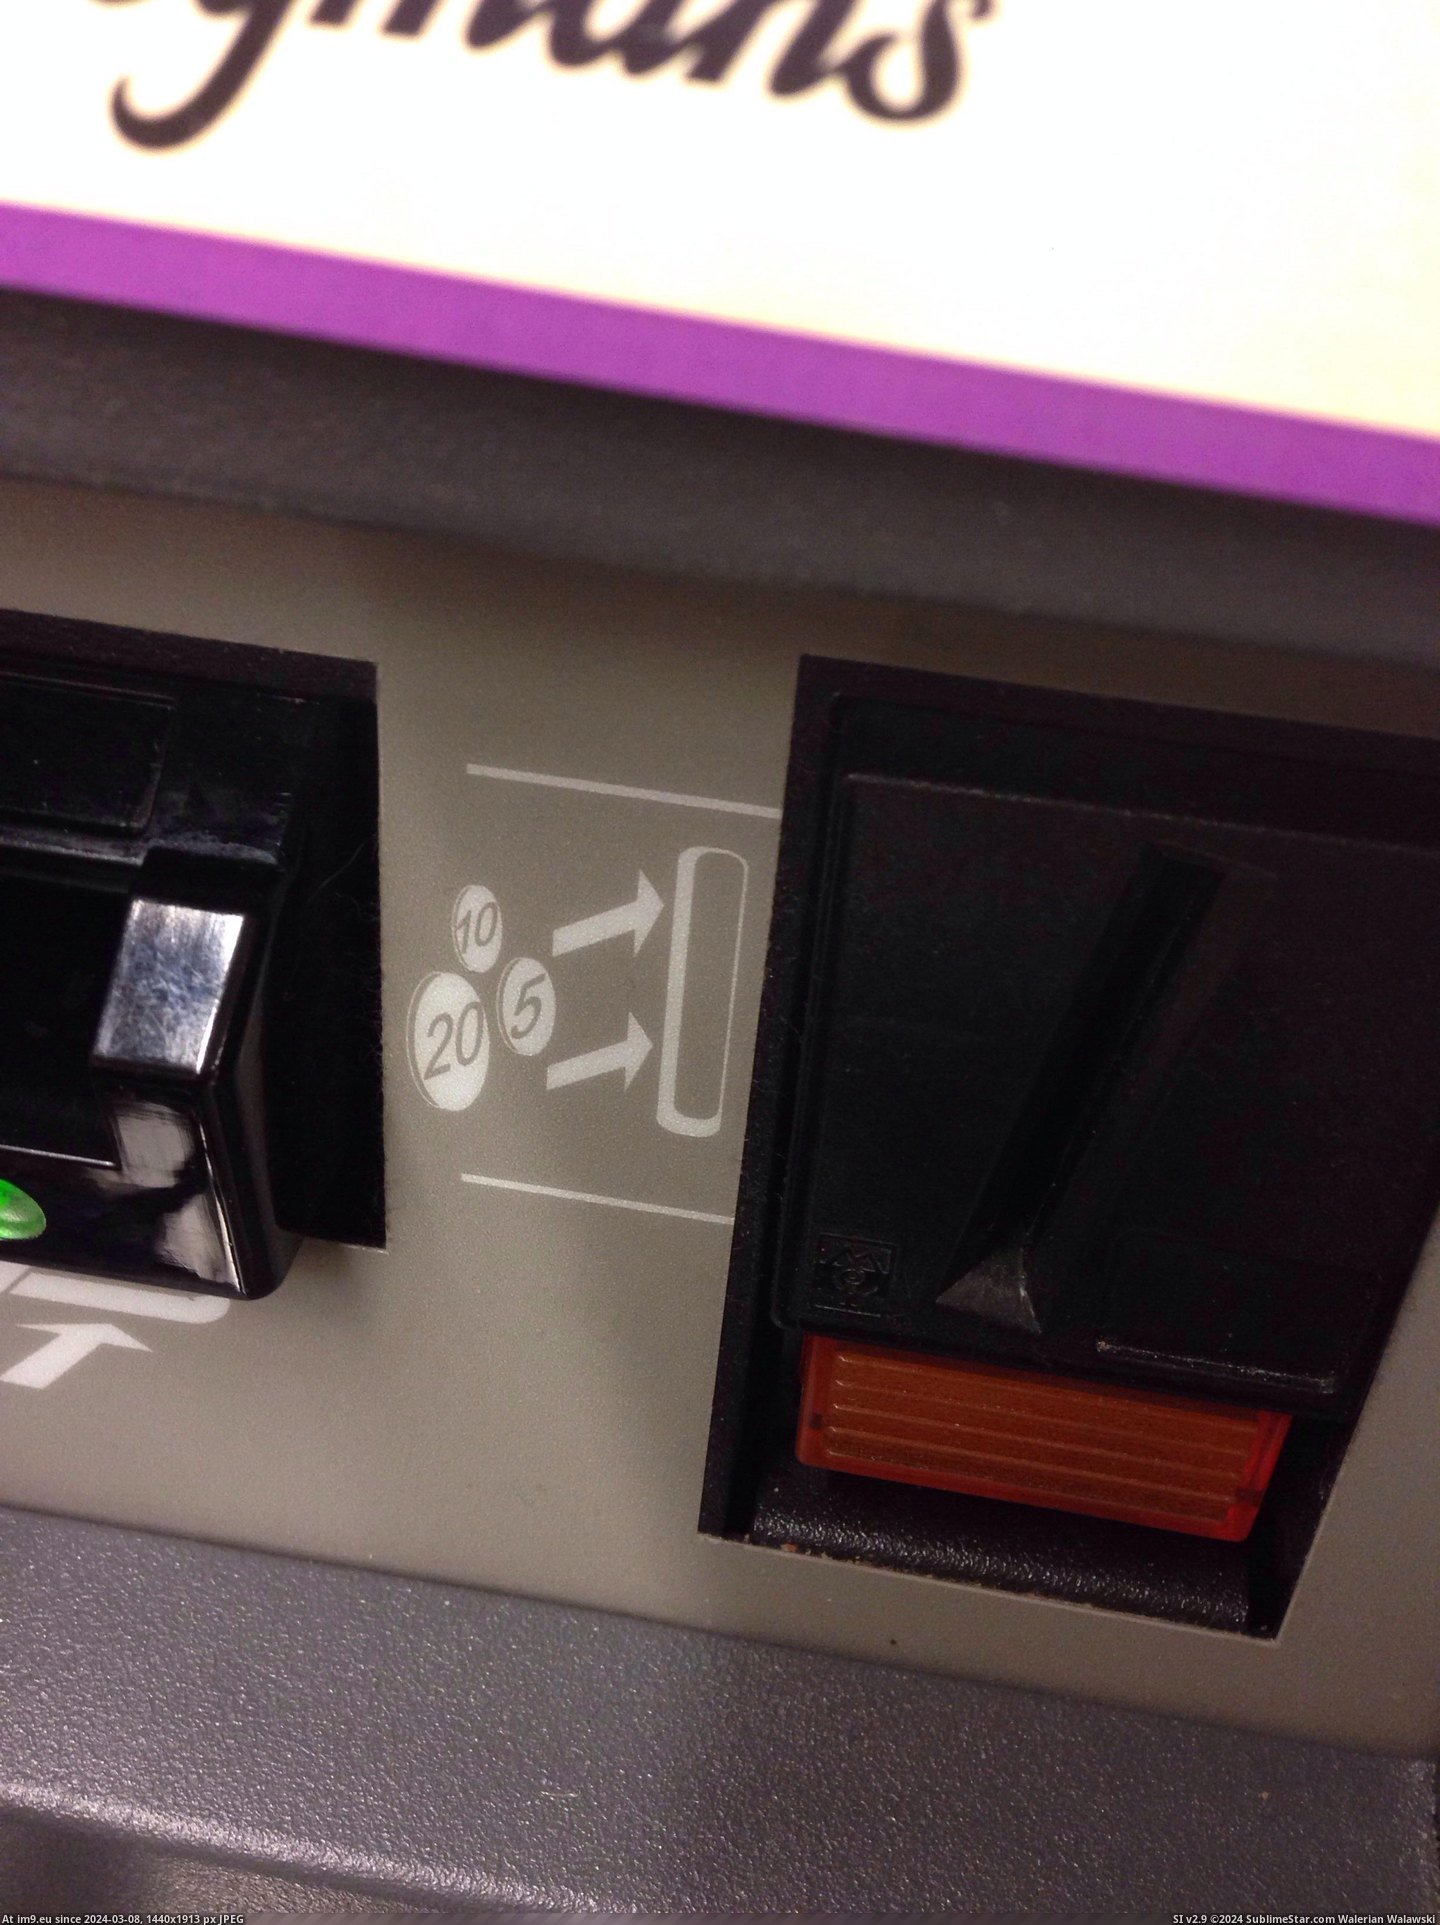 #Apparently #Machine #Accepts #Checkout #Coins #Cent [Mildlyinteresting] This self-checkout machine apparently accepts 20-cent coins. Pic. (Изображение из альбом My r/MILDLYINTERESTING favs))